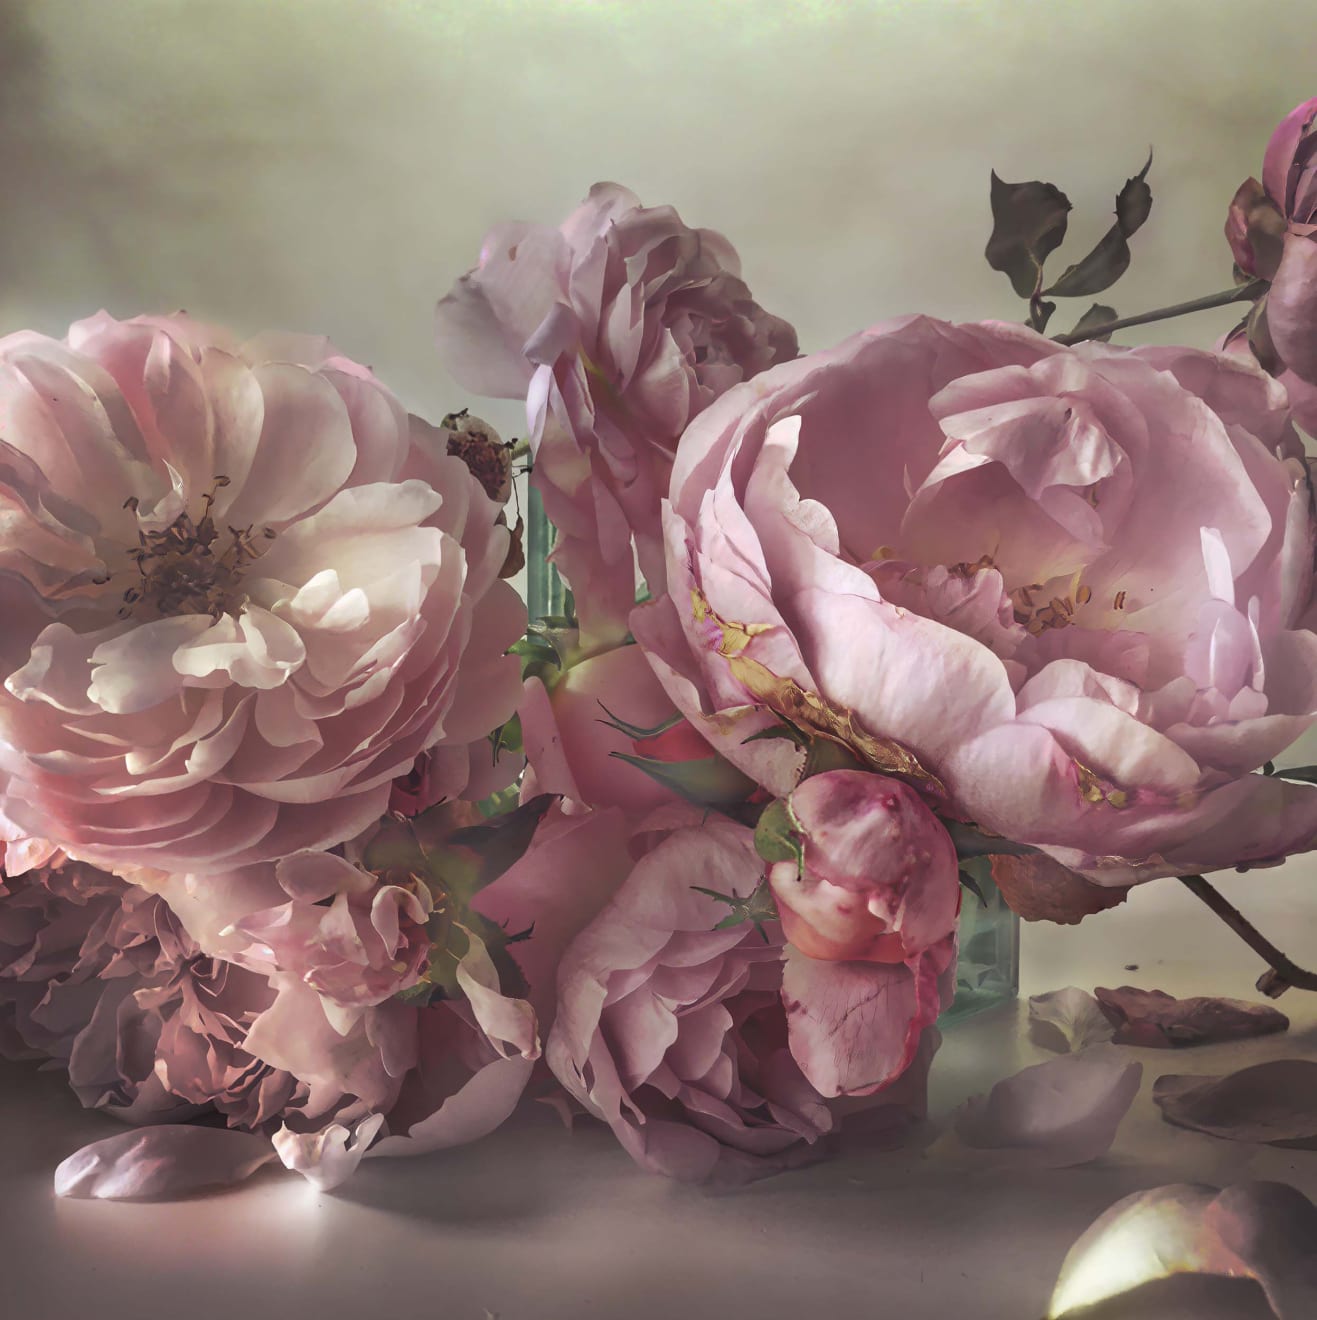 Nick Knight Sunday 11th October, 2015, 2019 Hand-coated pigment print (KNI 001)